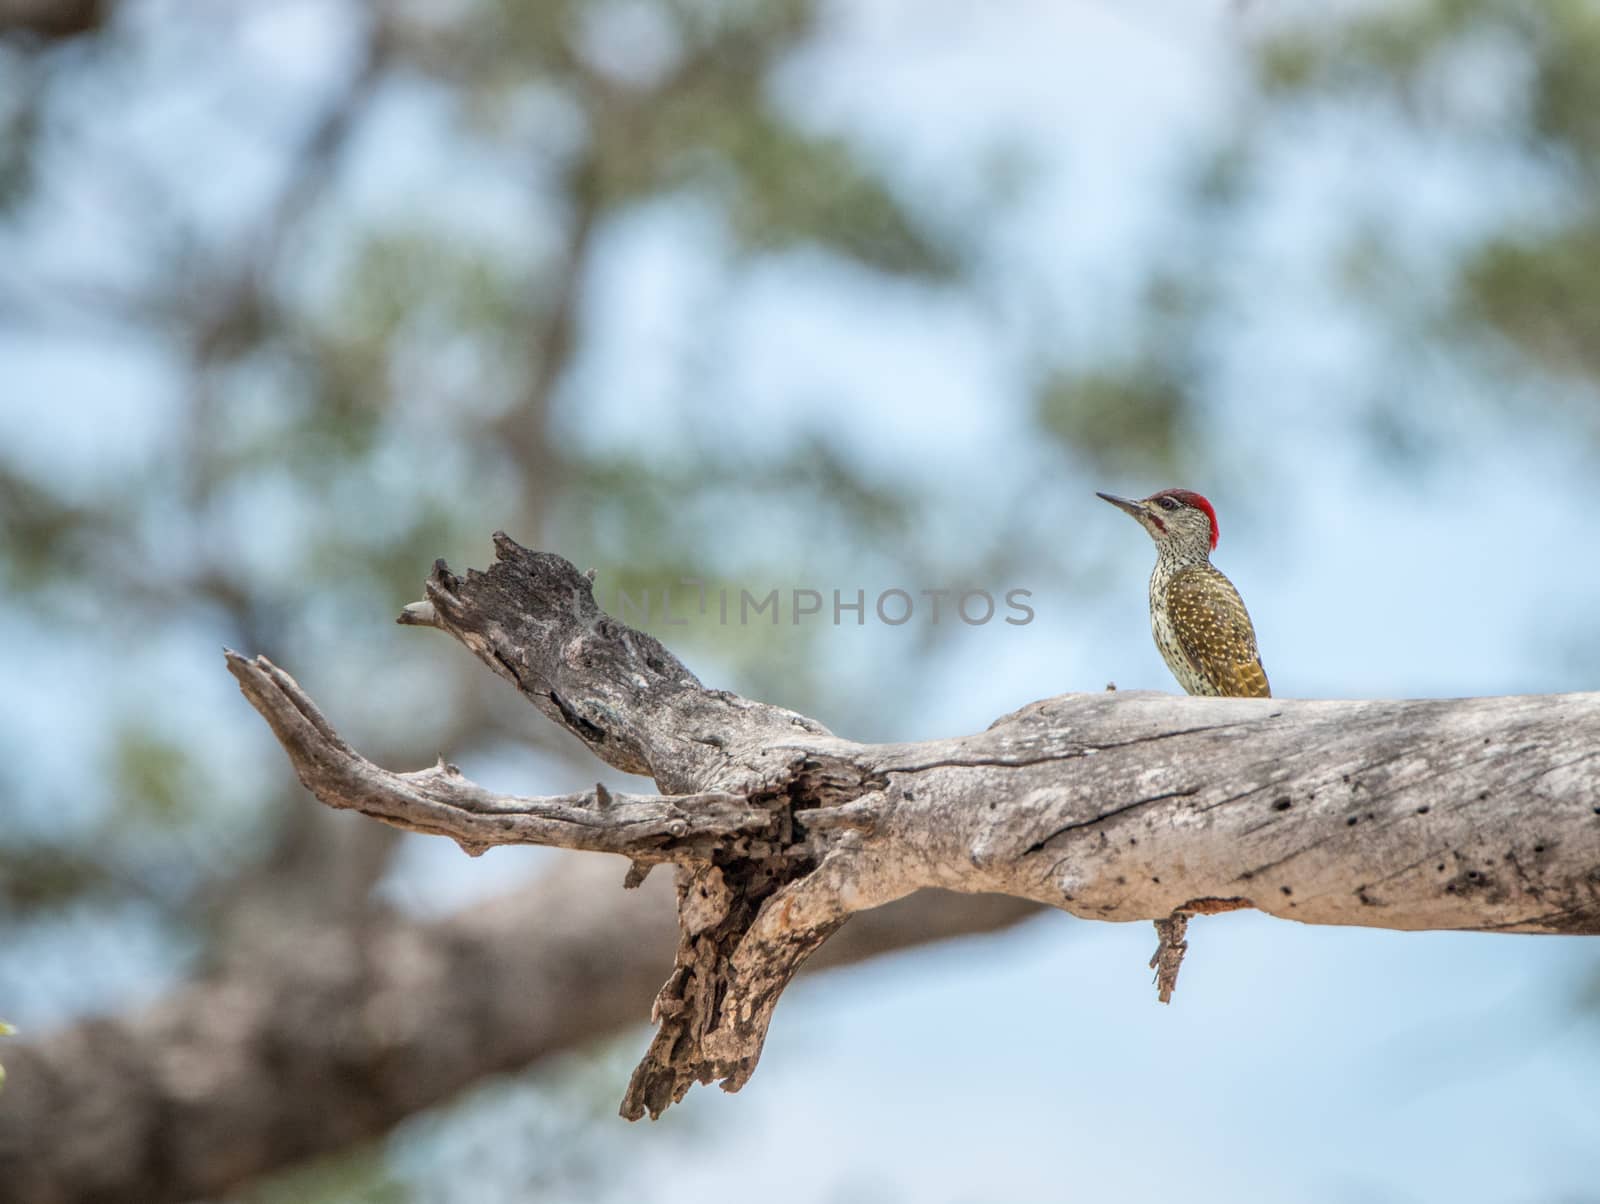 Golden-tailed woodpecker on a branch in the Kruger National Park, South Africa.